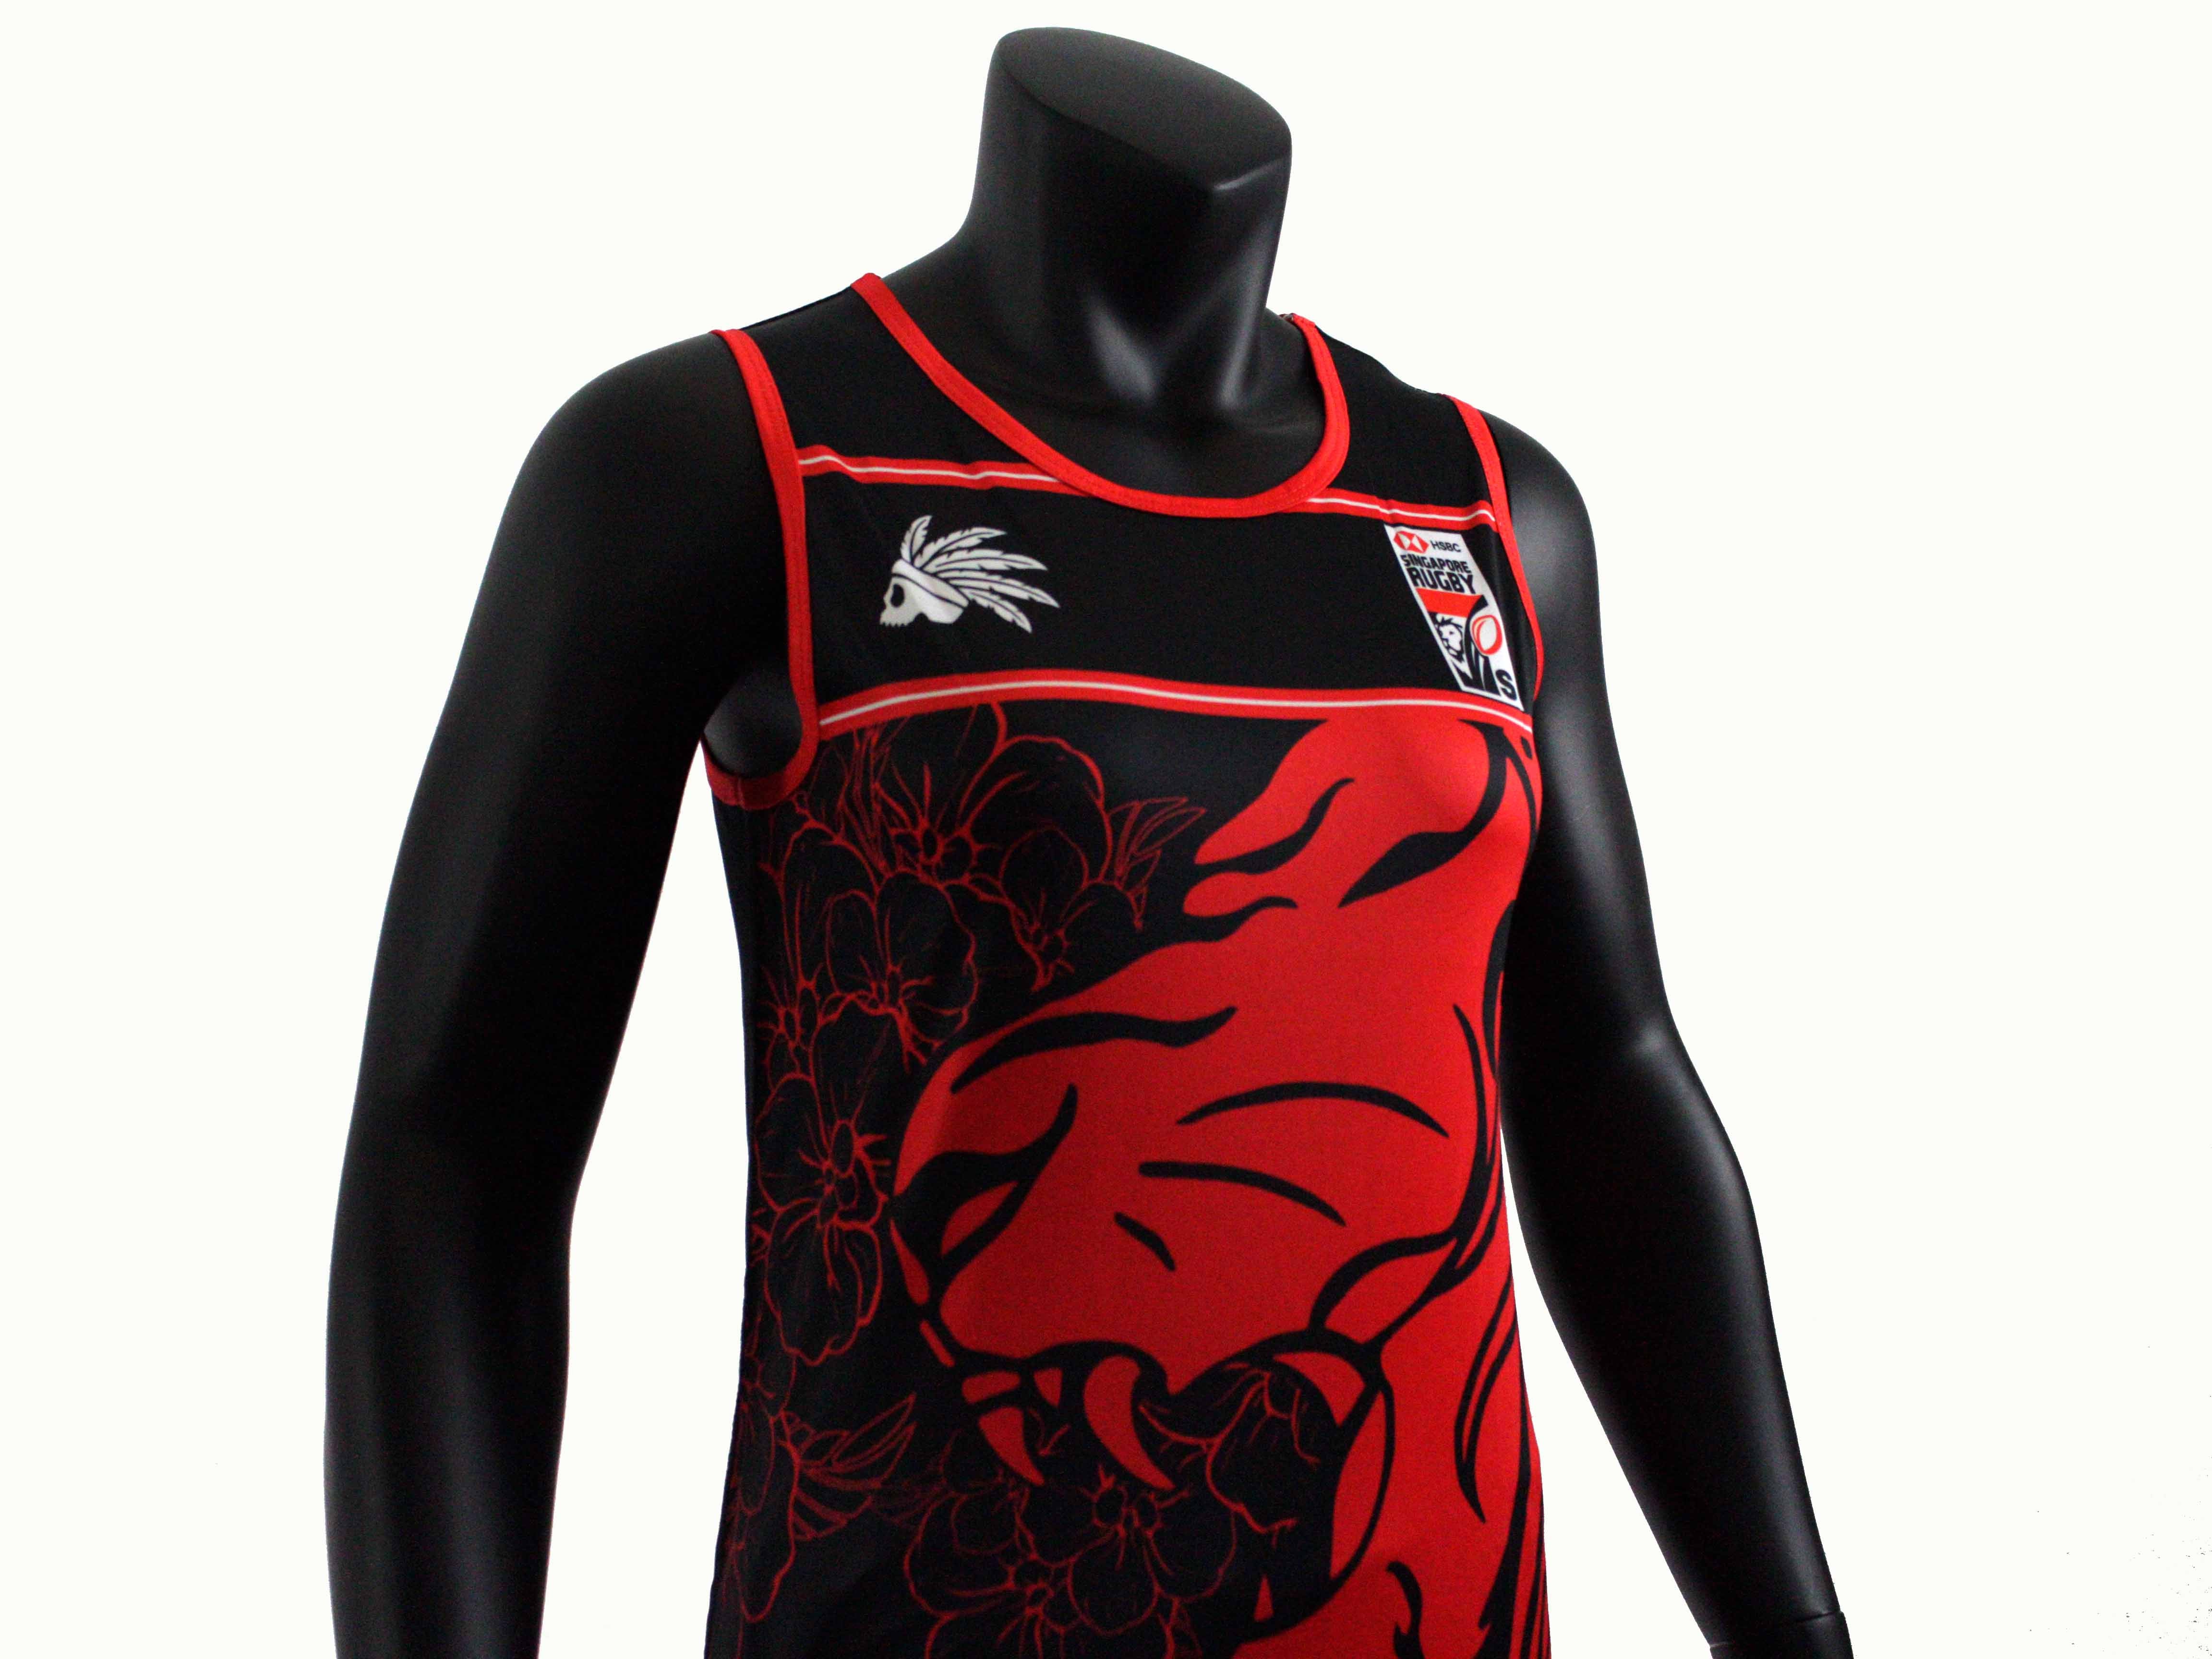 SINGAPORE RUGBY SINGLET